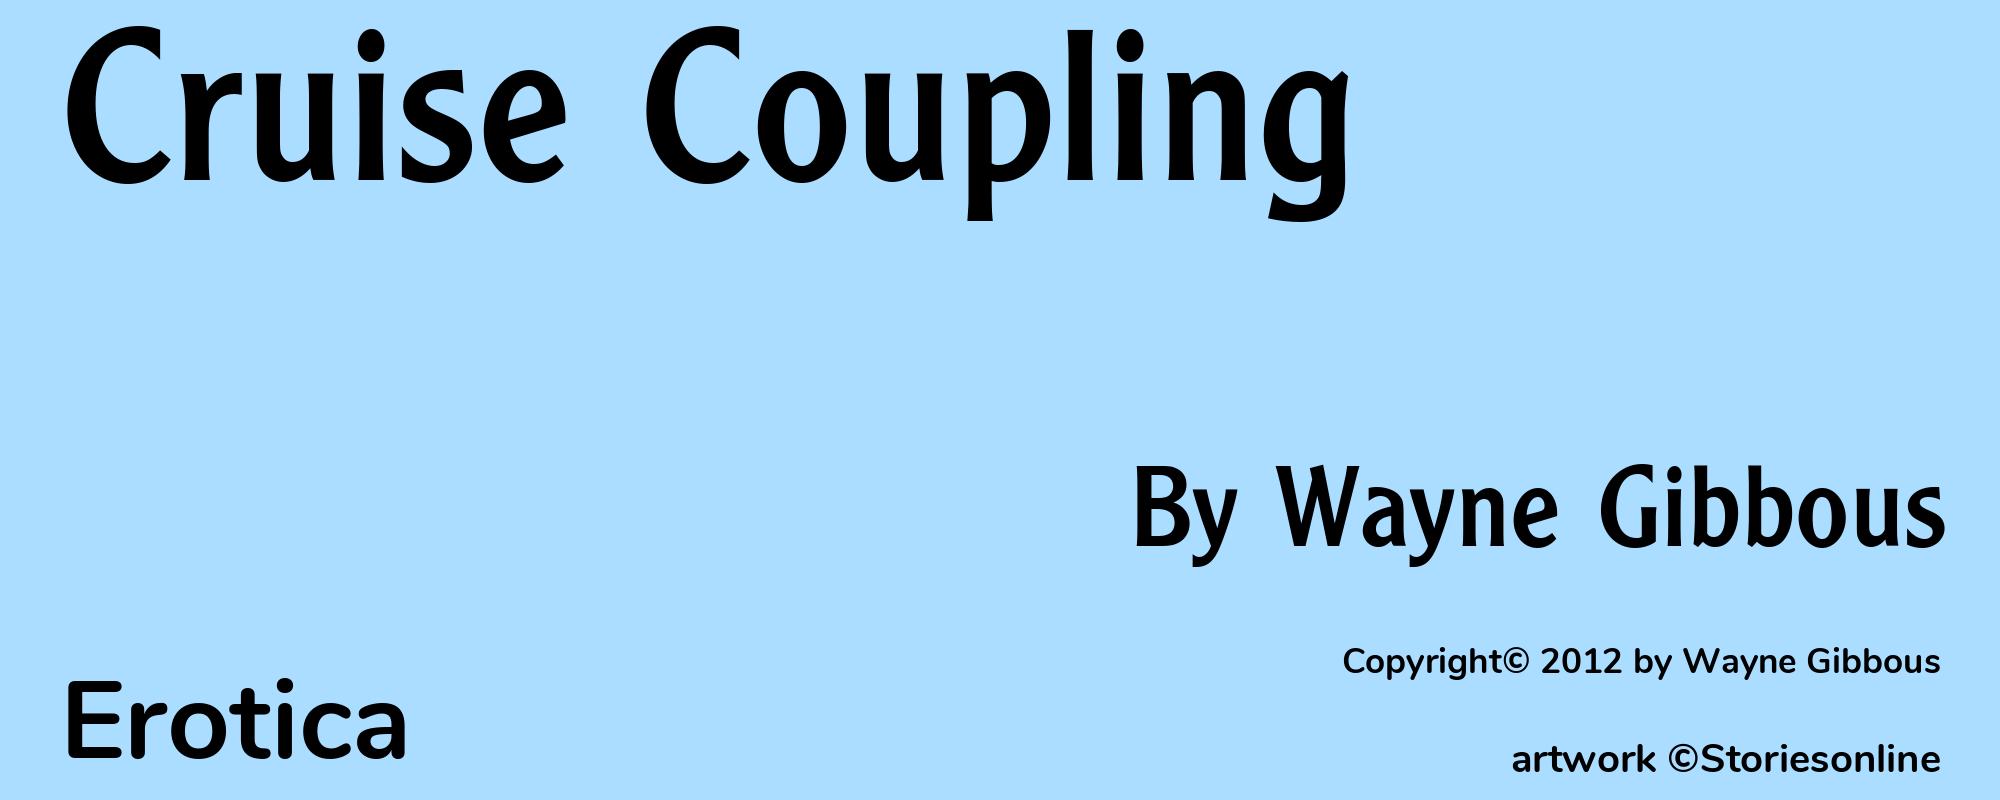 Cruise Coupling - Cover